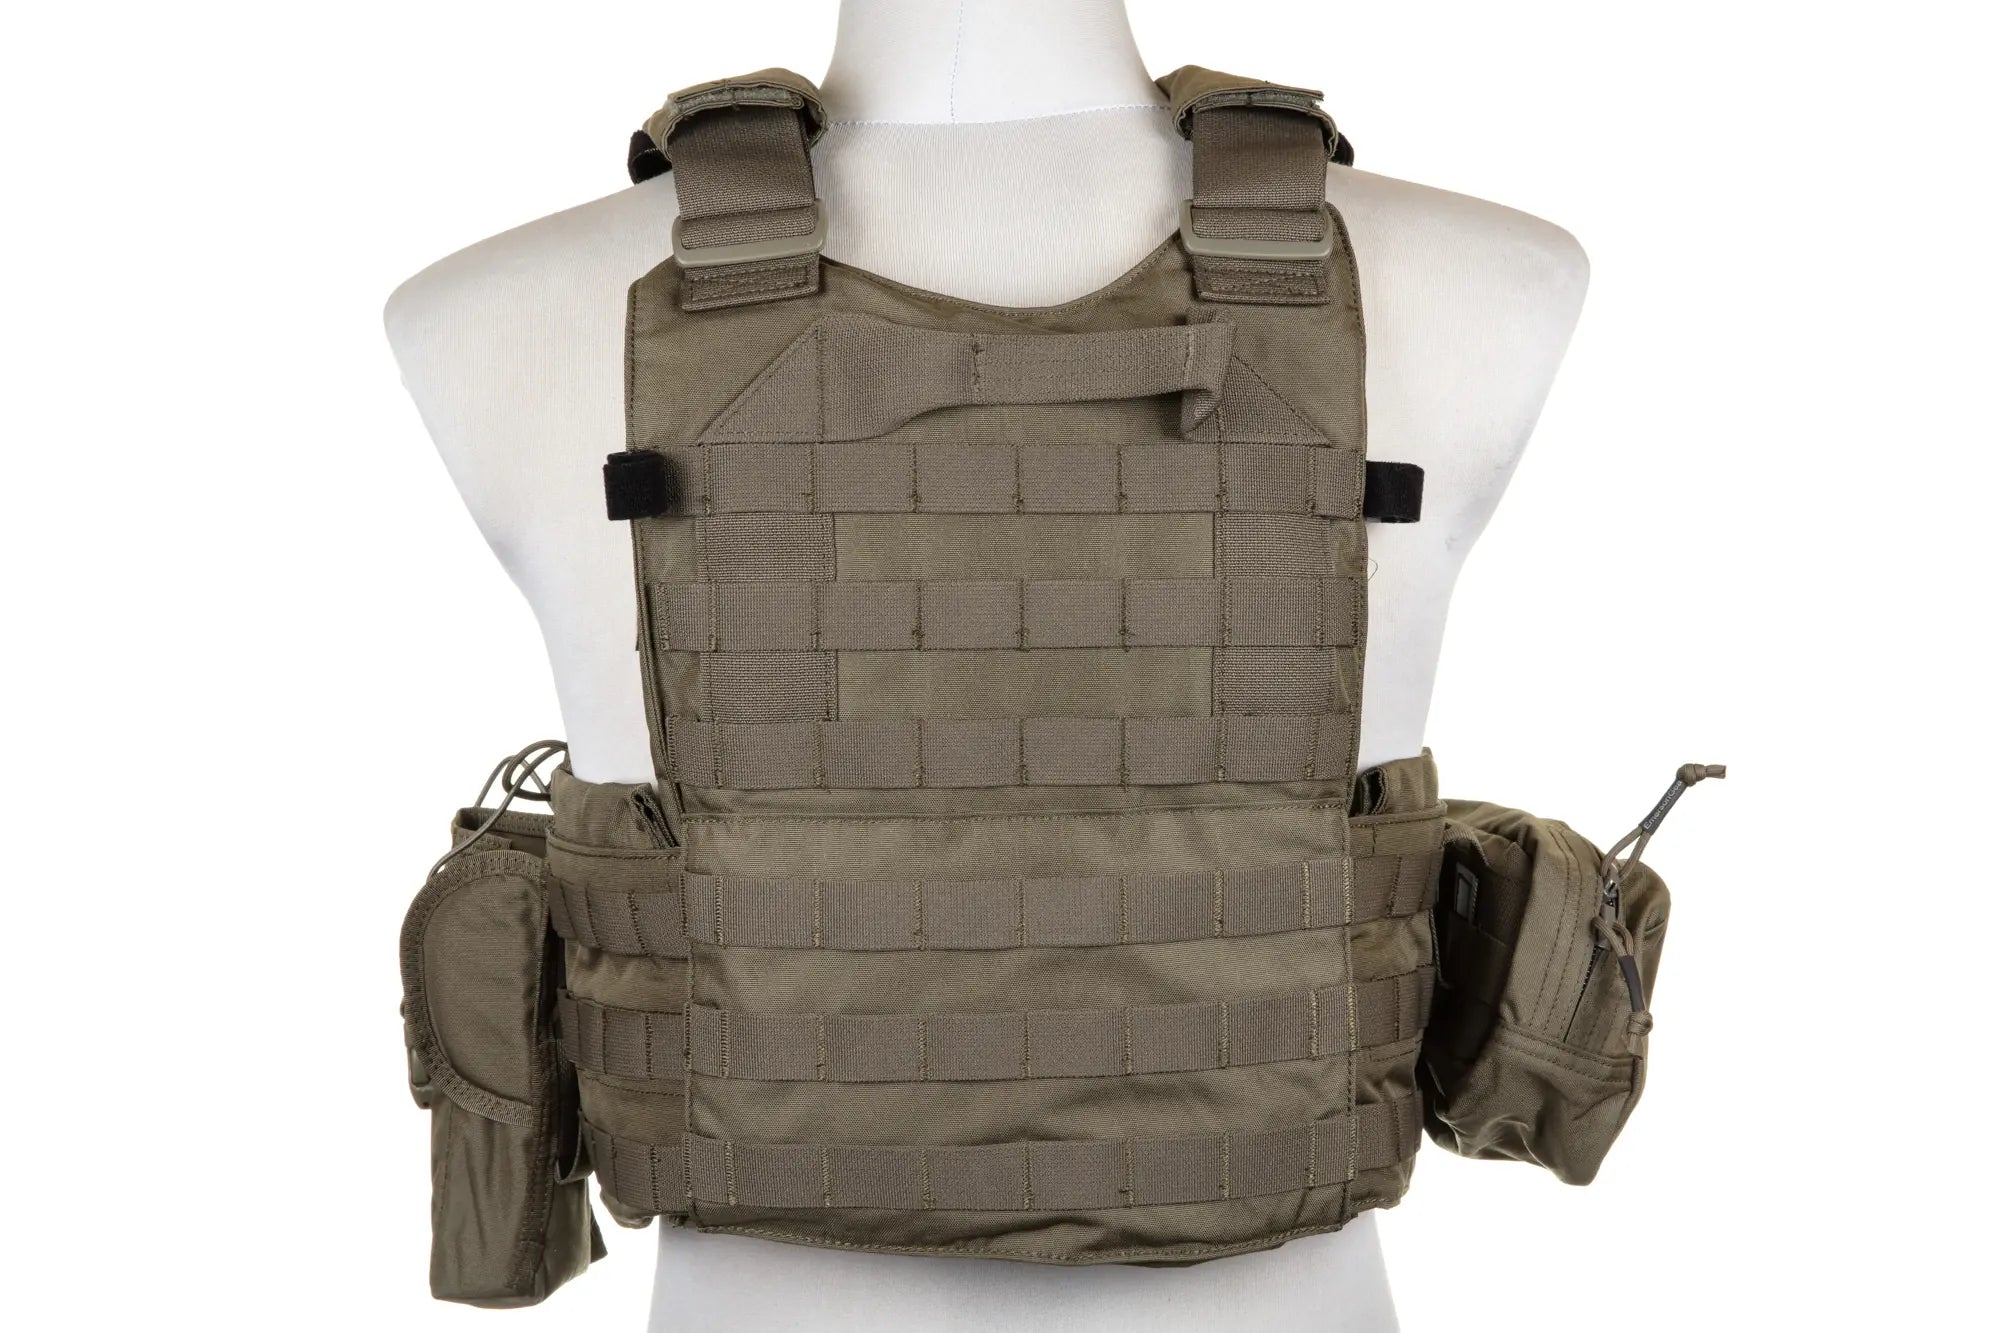 Emerson Gear 6094A Style Plate Carrier waistcoat with Ranger Green cargo kit